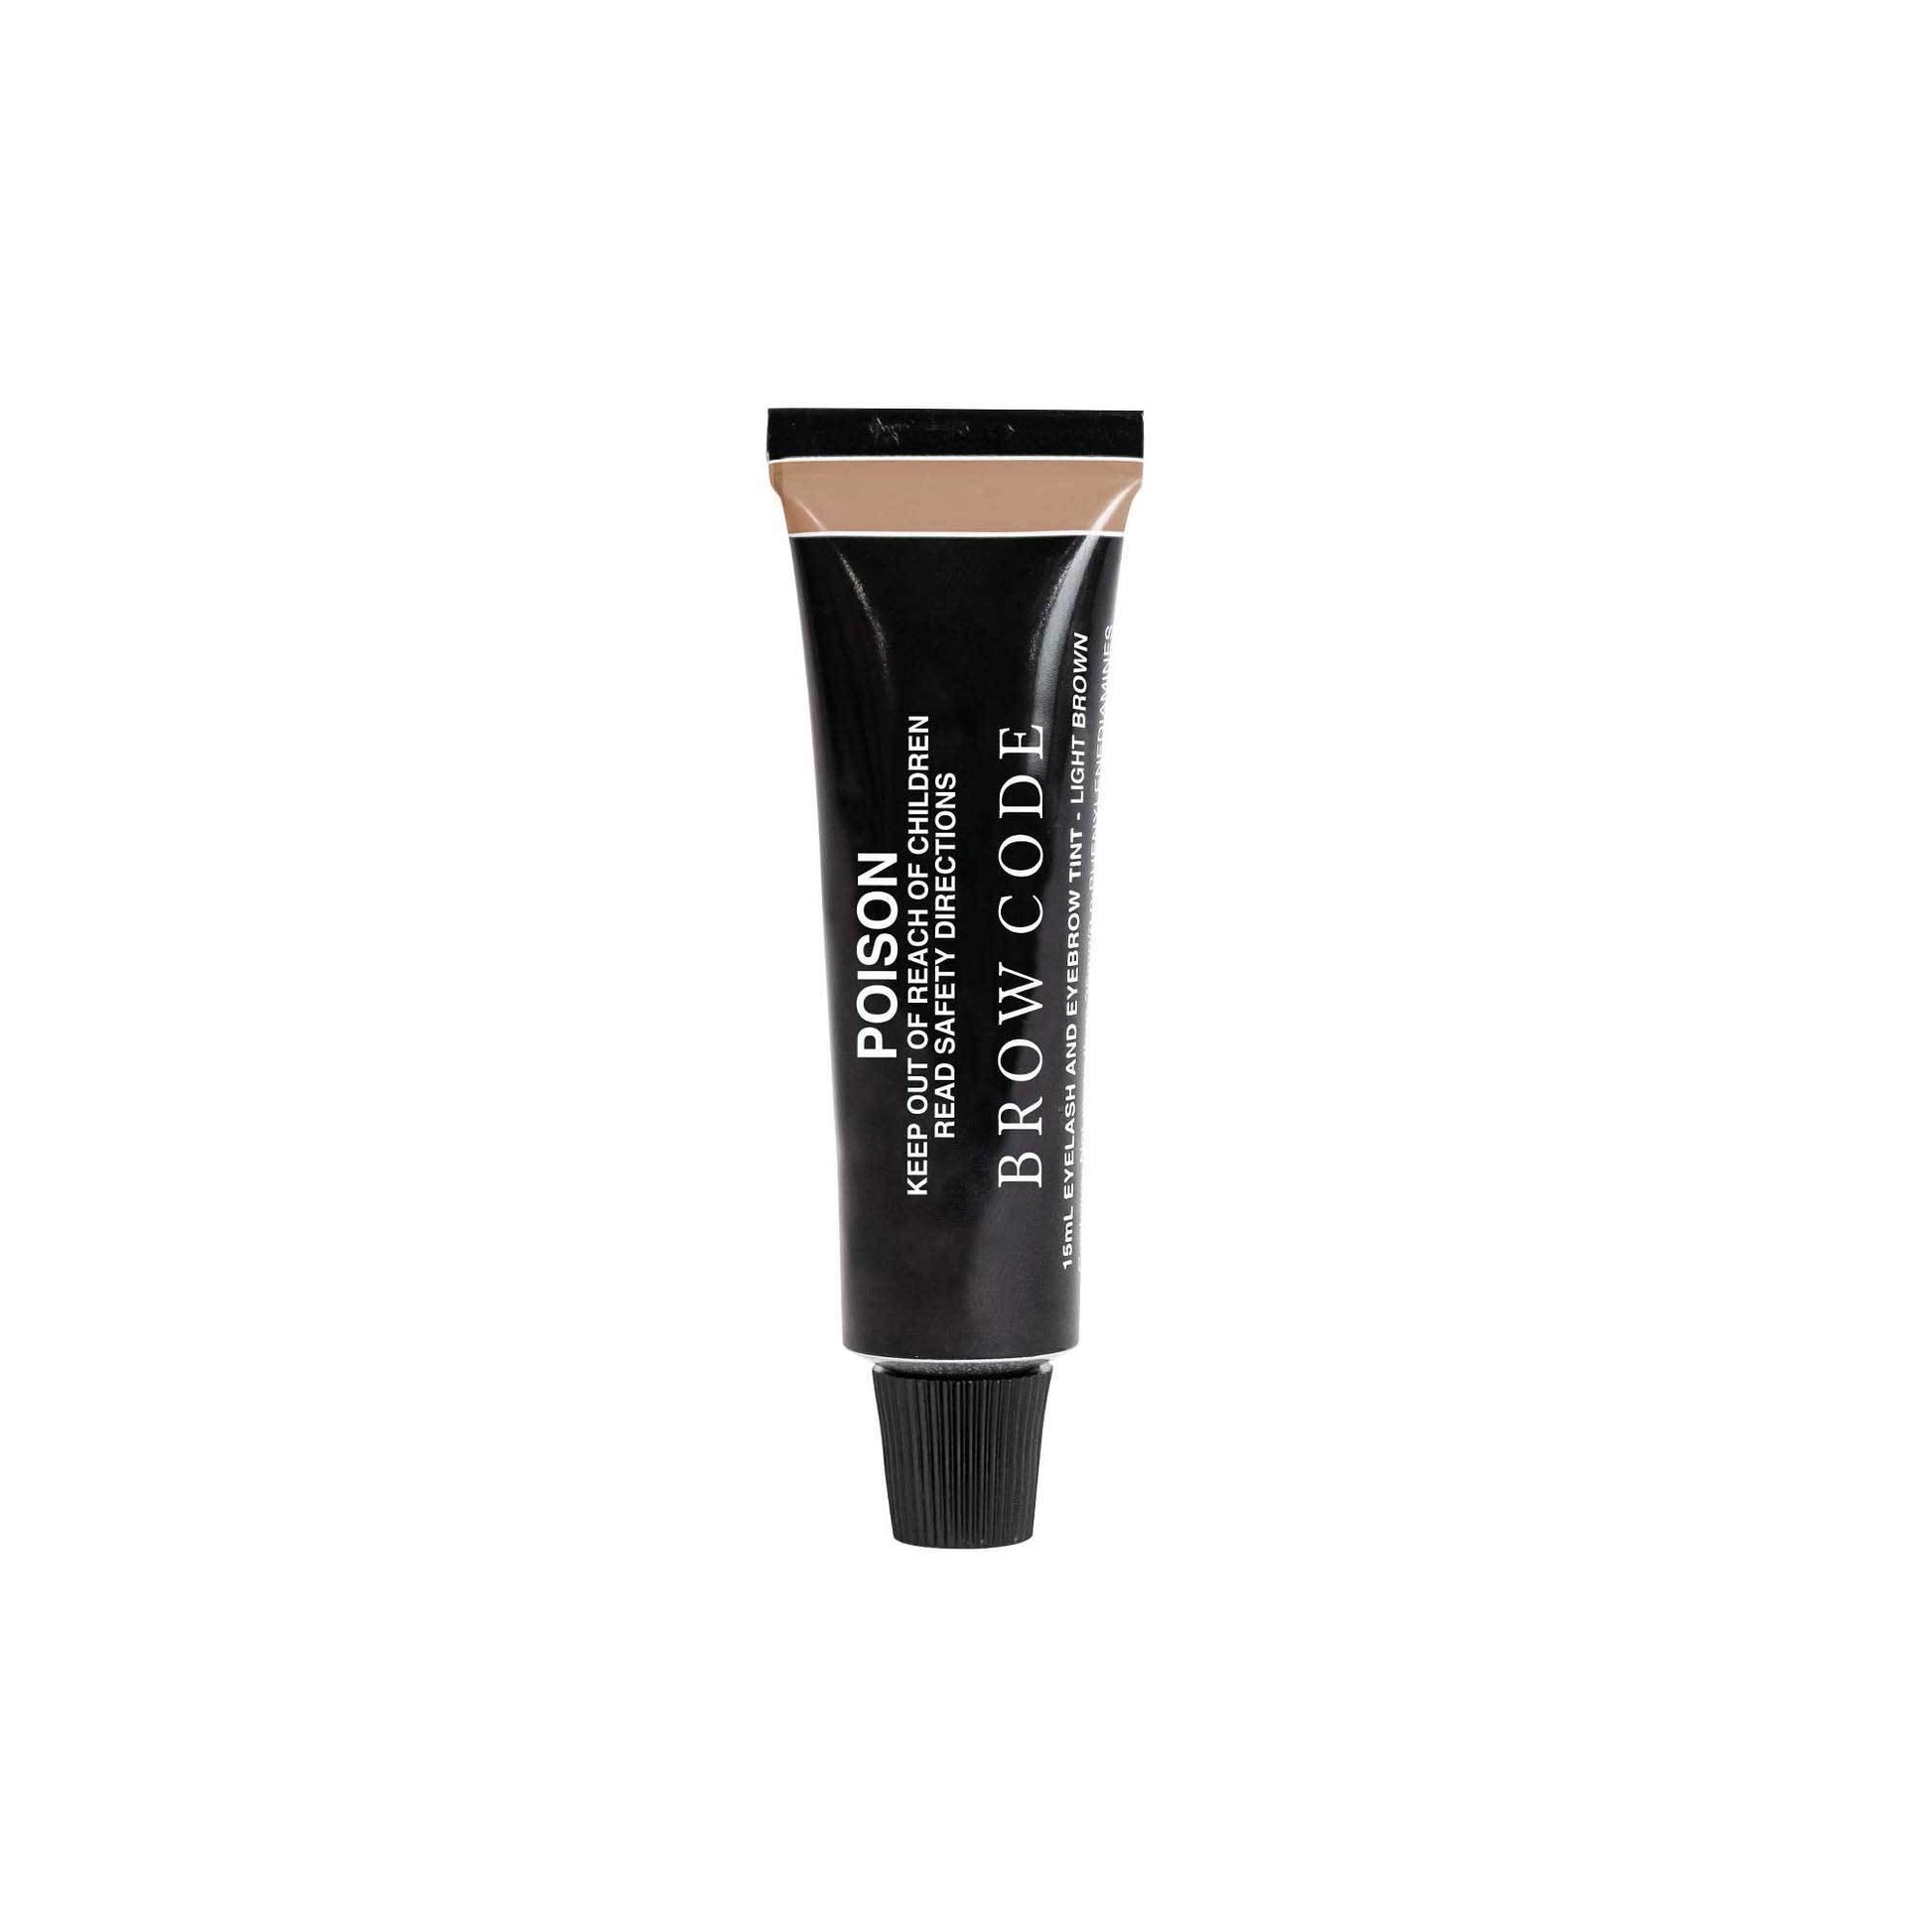 Brow Tint Tube - Color-Light Brown - Against a white background